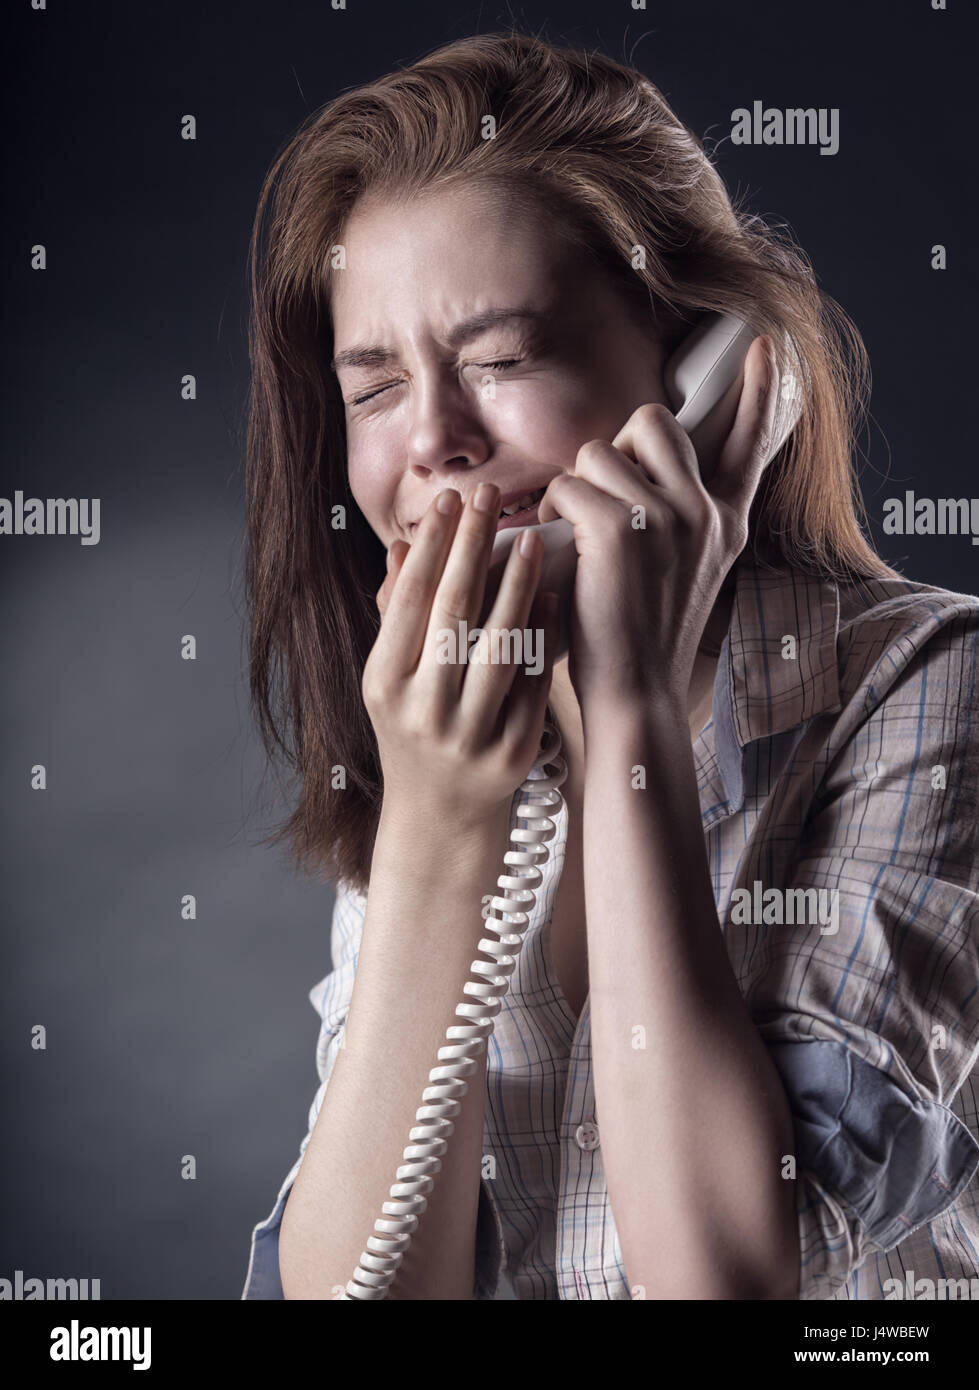 Crying young woman with a phone on a dark background Stock Photo